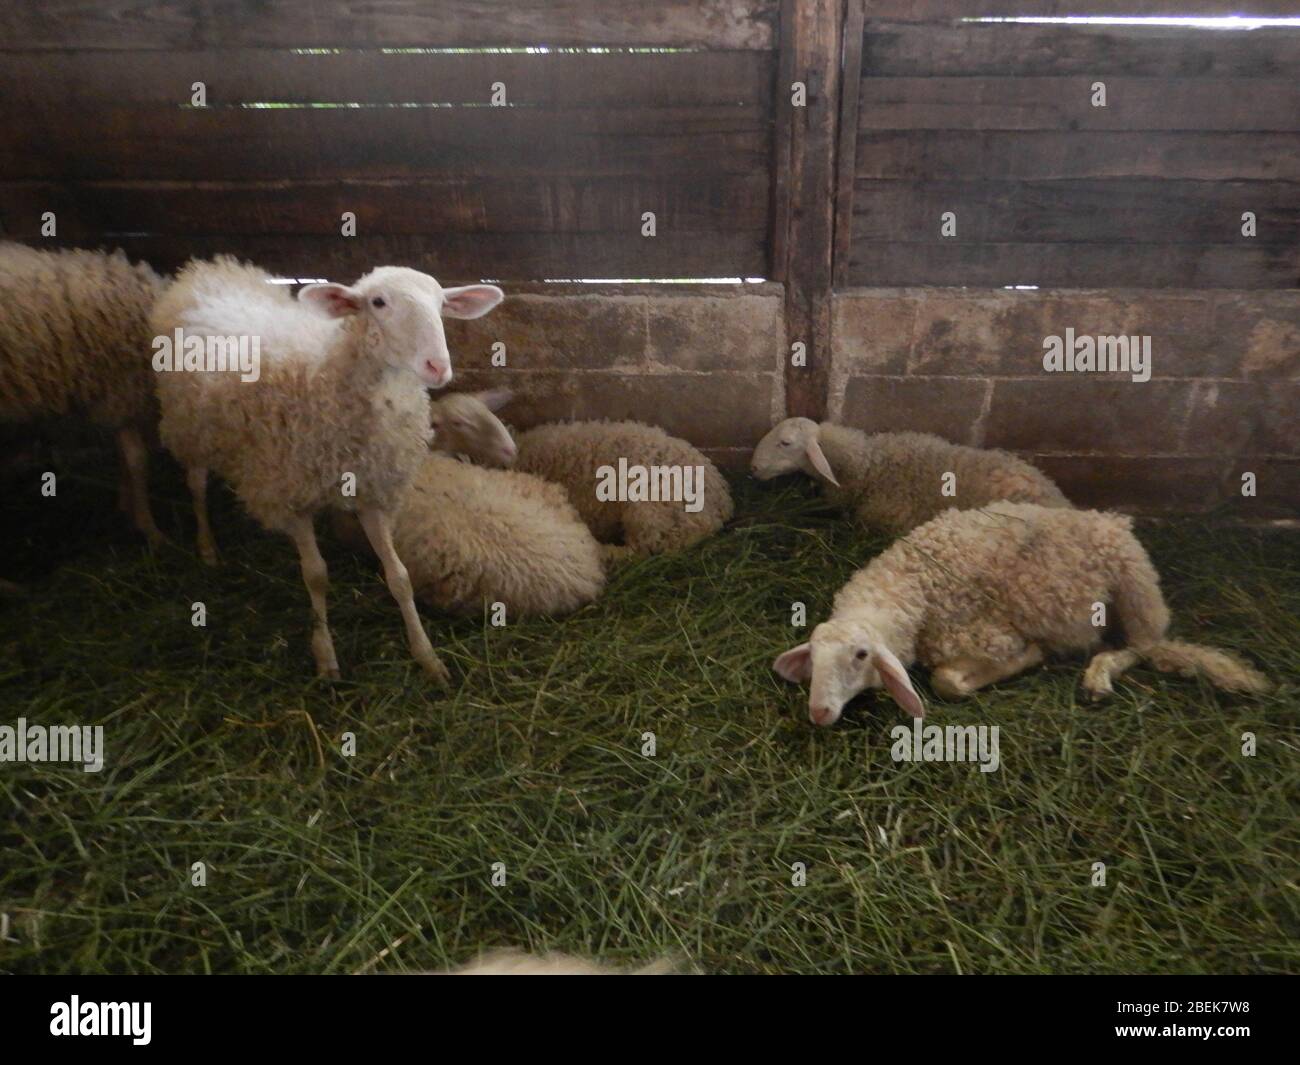 A flock of sheep in a stable Stock Photo